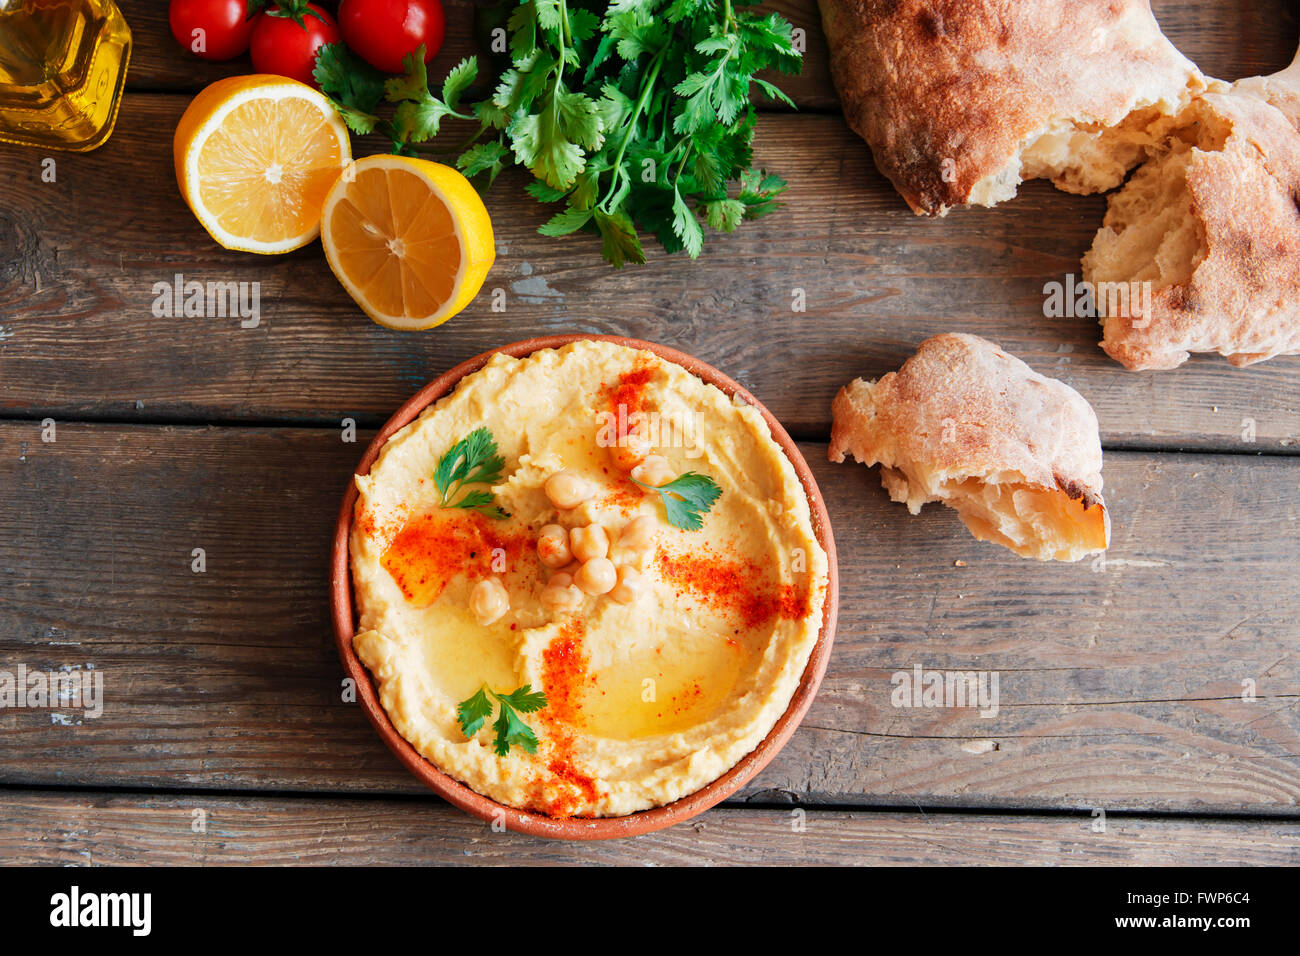 Healthy Homemade Creamy Hummus with Olive Oil and Pita Stock Photo